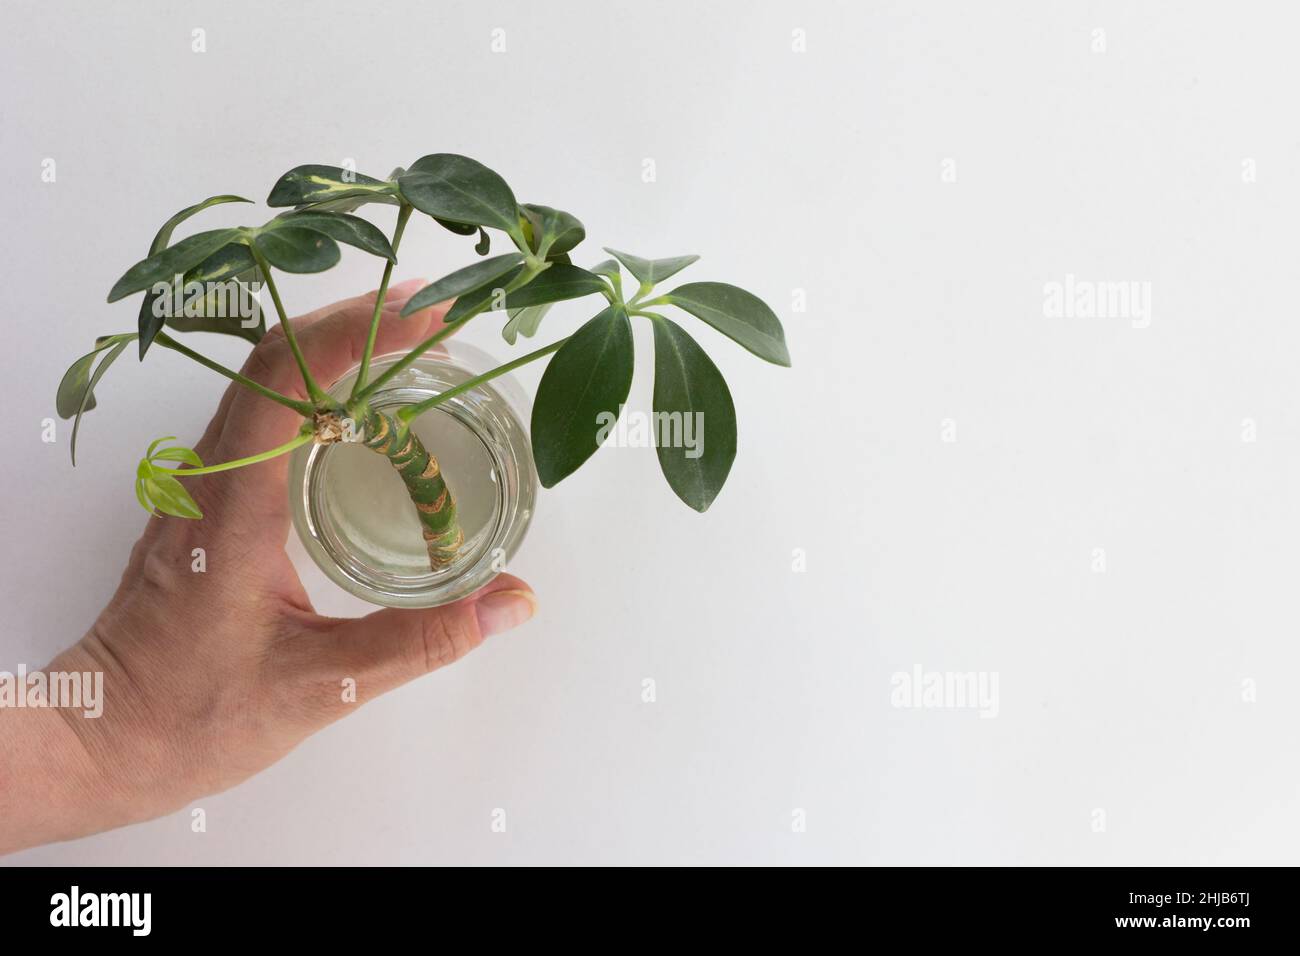 Woman hand holding bottle with water and cutting of Schefflera arboricola or dwarf umbrella tree named in it rooting on white background Stock Photo